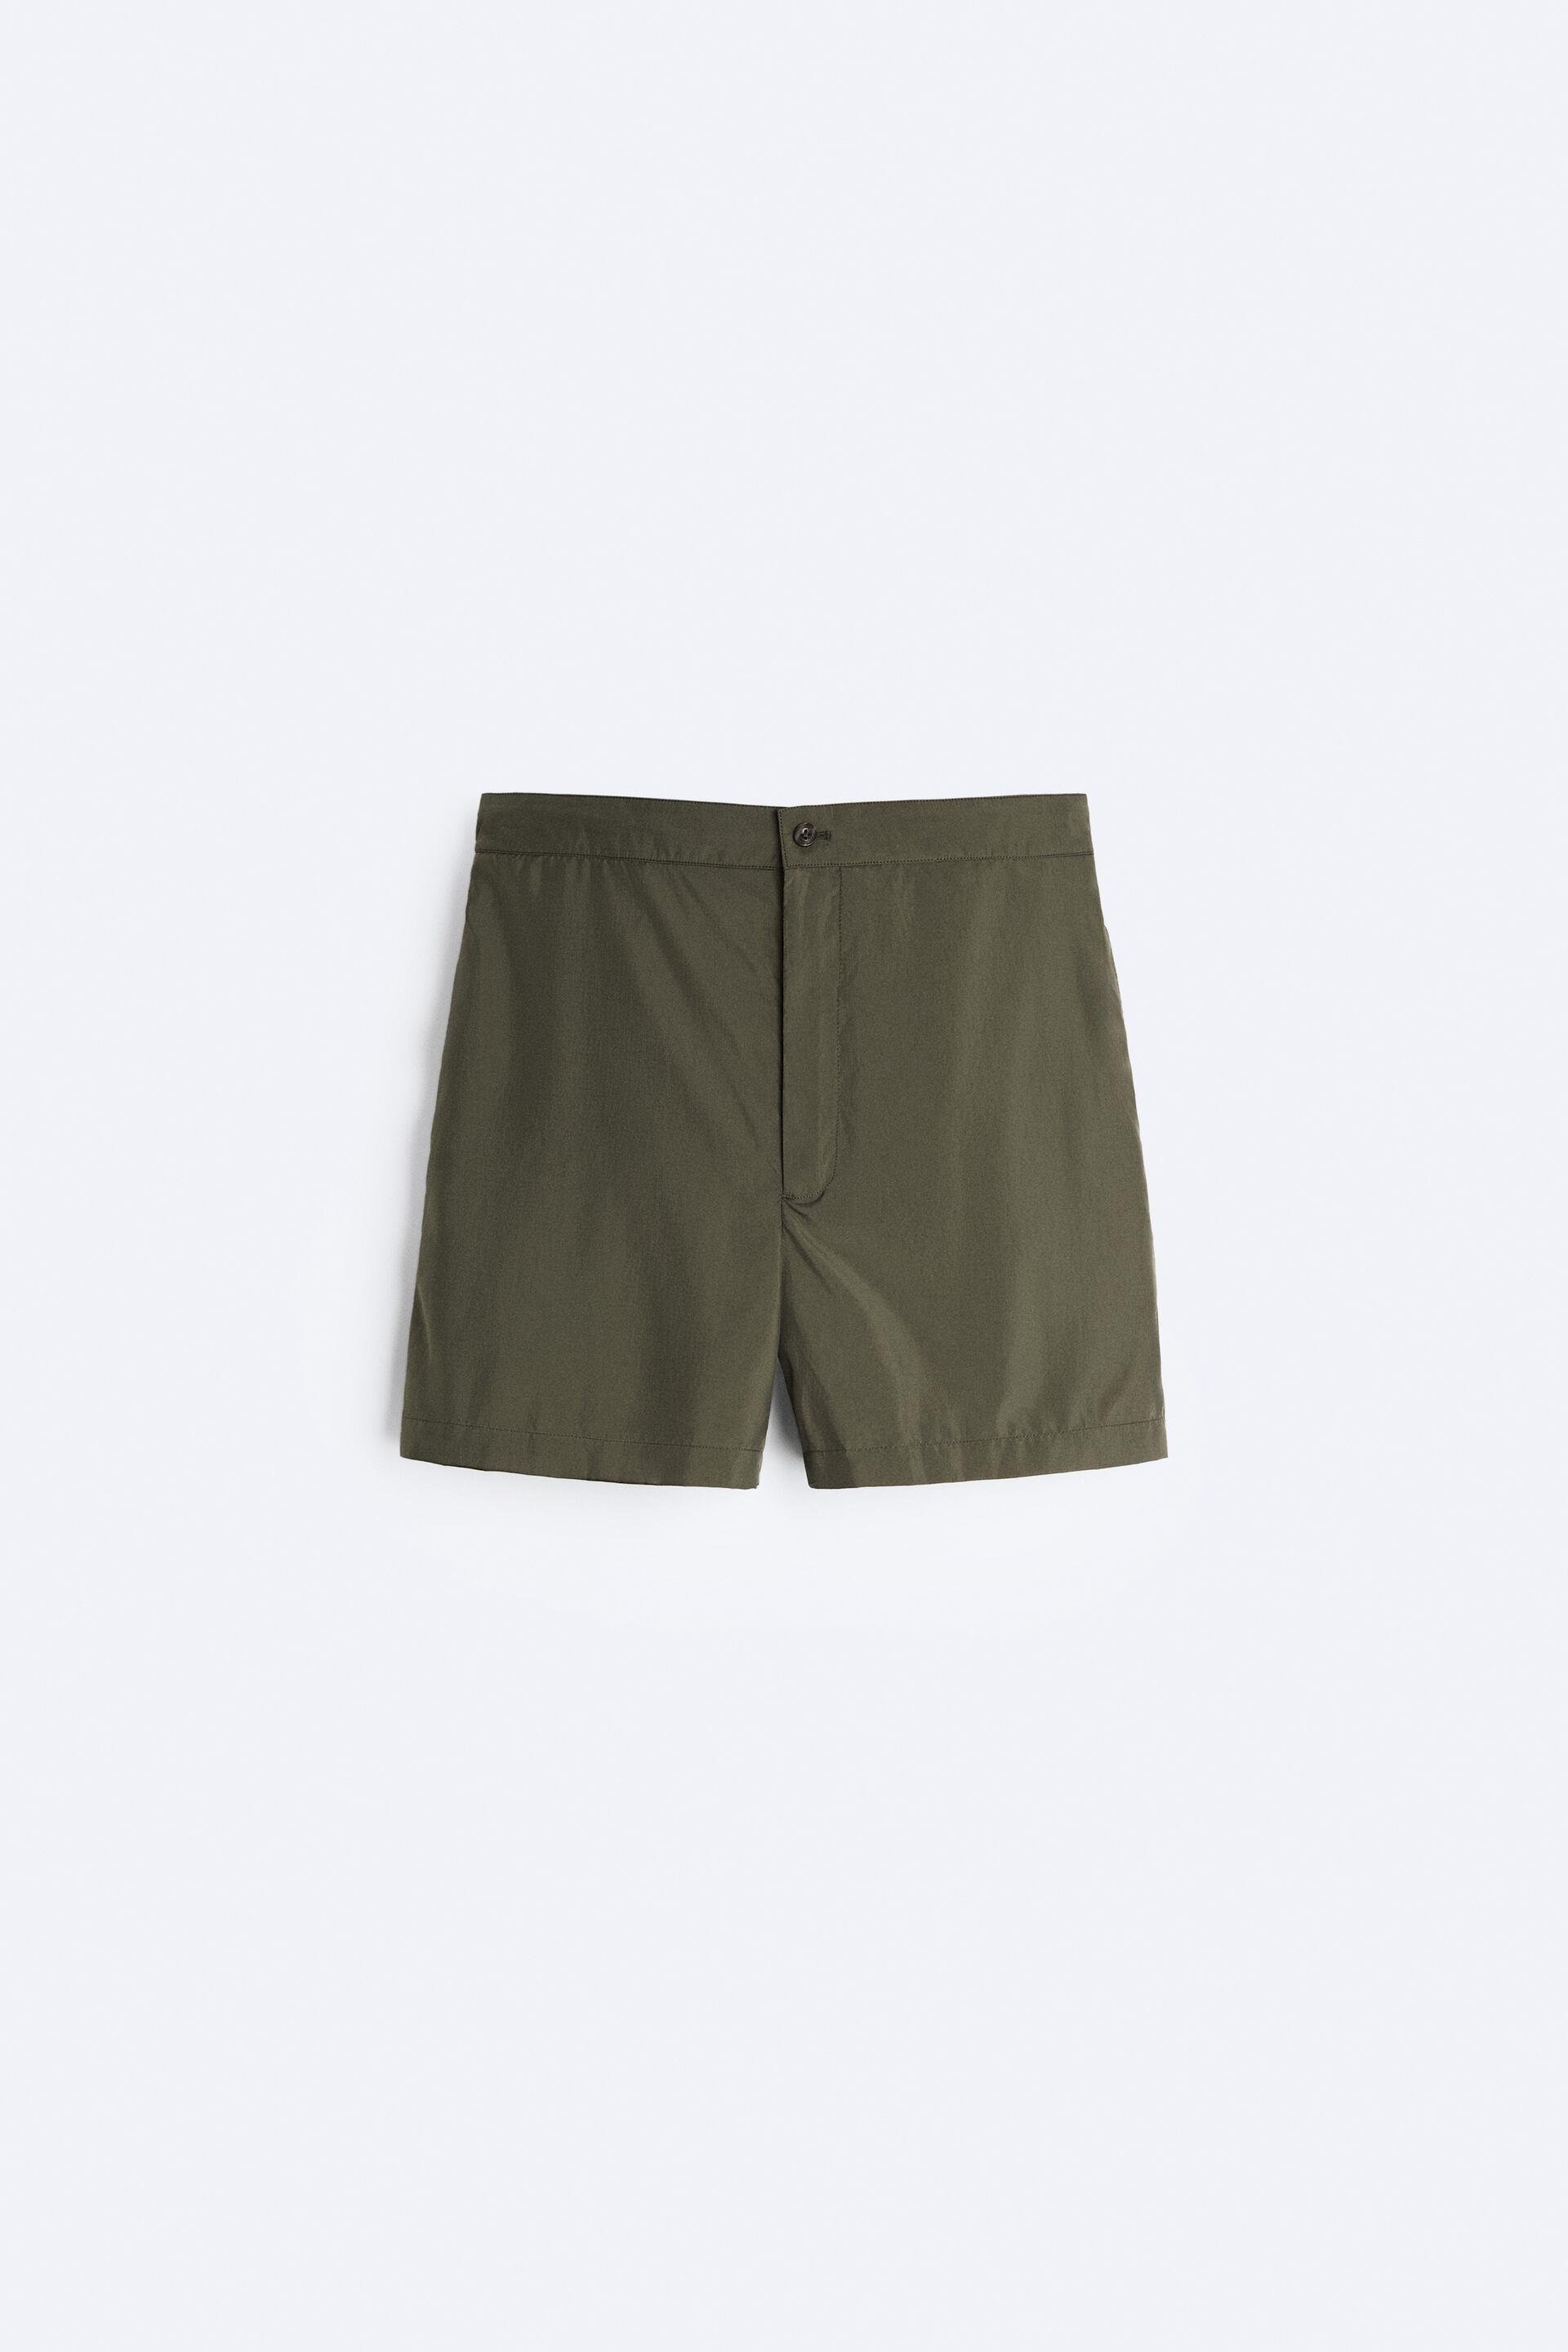 BUTTON SWIMMING TRUNKS by ZARA